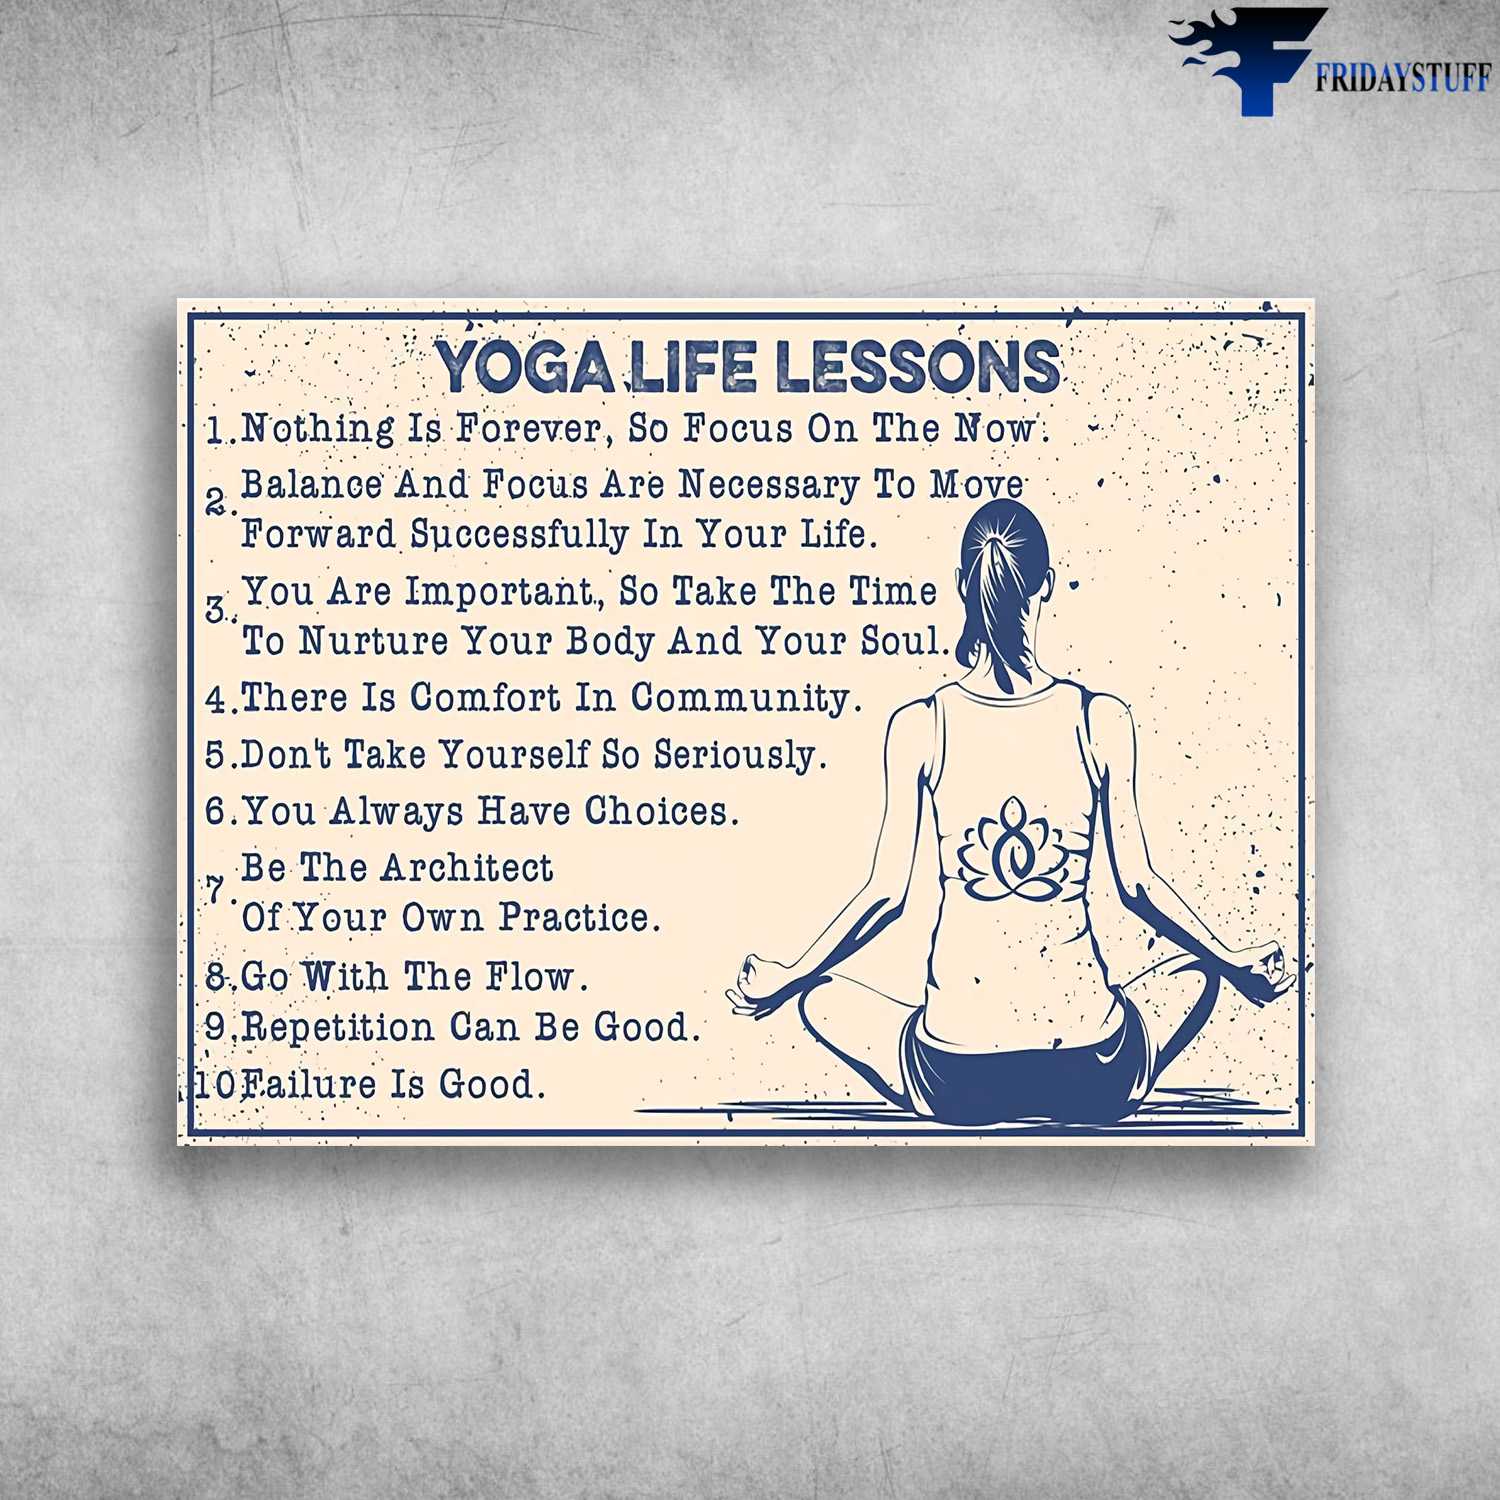 Yoga Girl, Yoga Room - Yoga Life Lessons, Nothing Is Forever, So Focus On The Now, Balance And Focus Are Necessary, To Move Forward Successfully In Your Life, You Are Important, So Take The Time To Nurture Your Body, And Your Soul